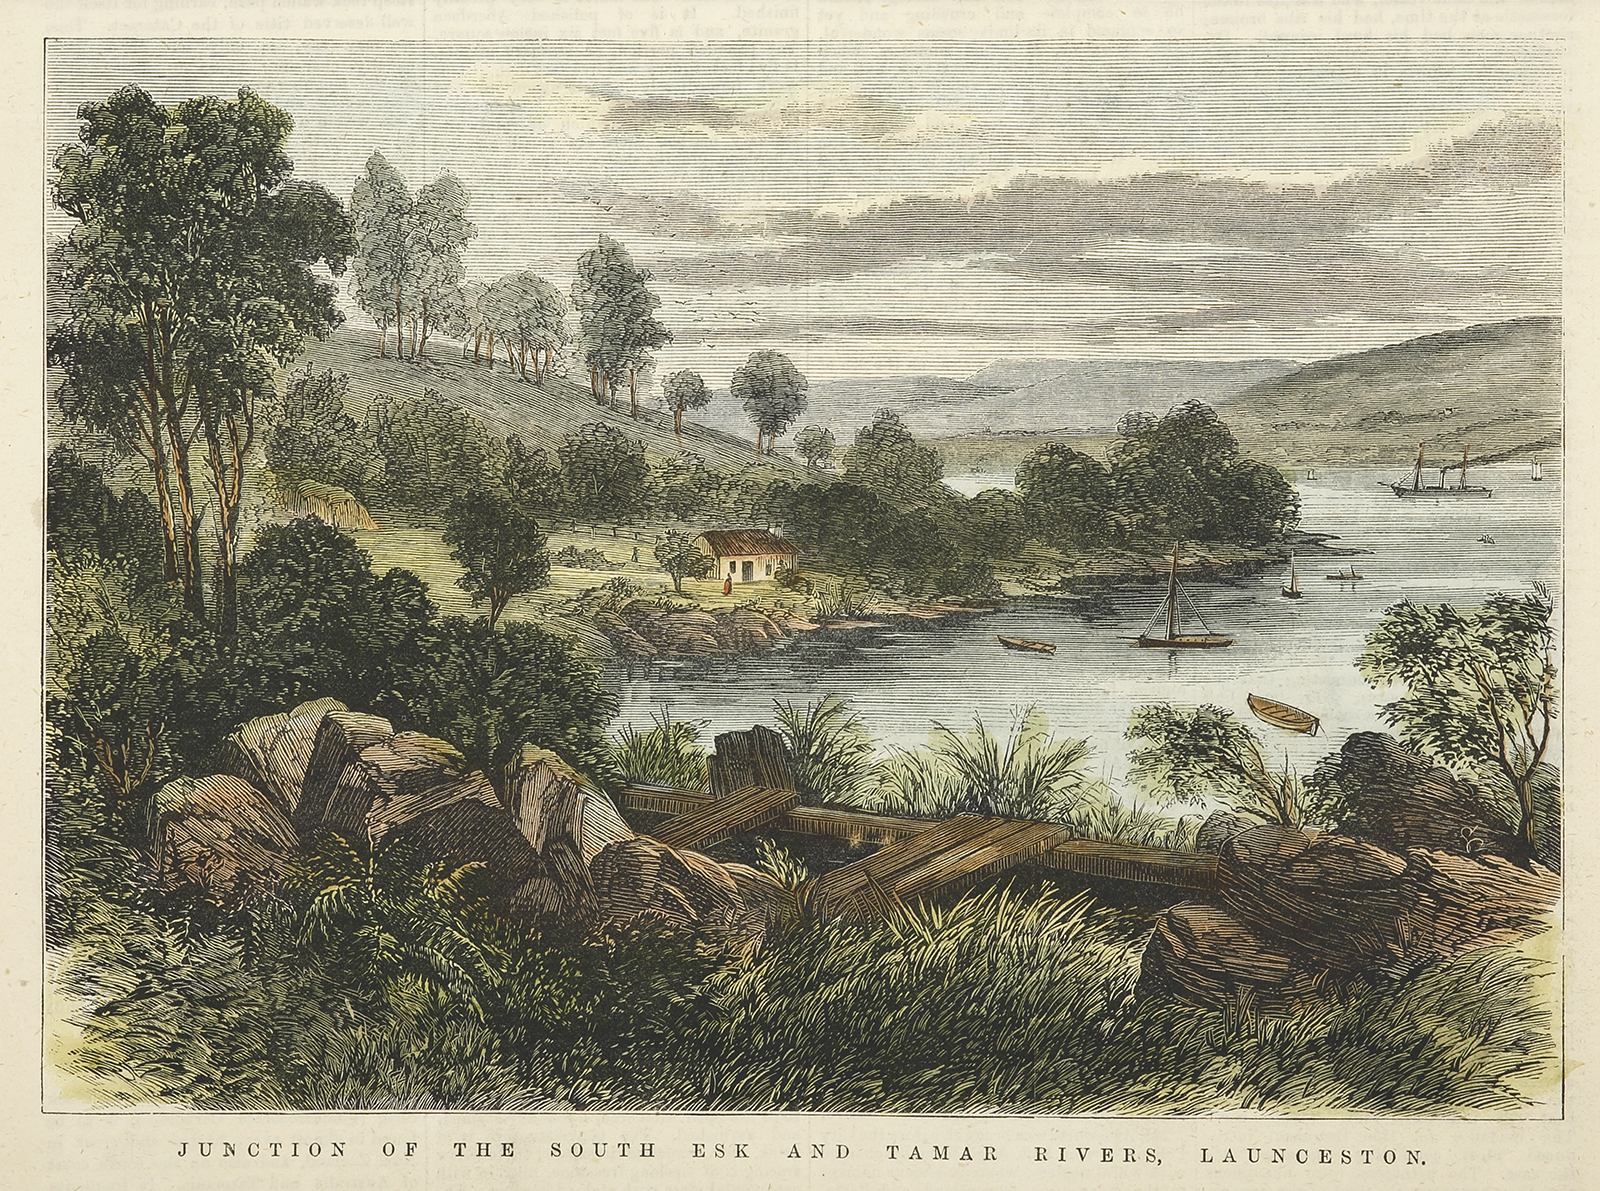 Junction of the South Esk and Tamar Rivers, Launceston. - Antique View from 1876